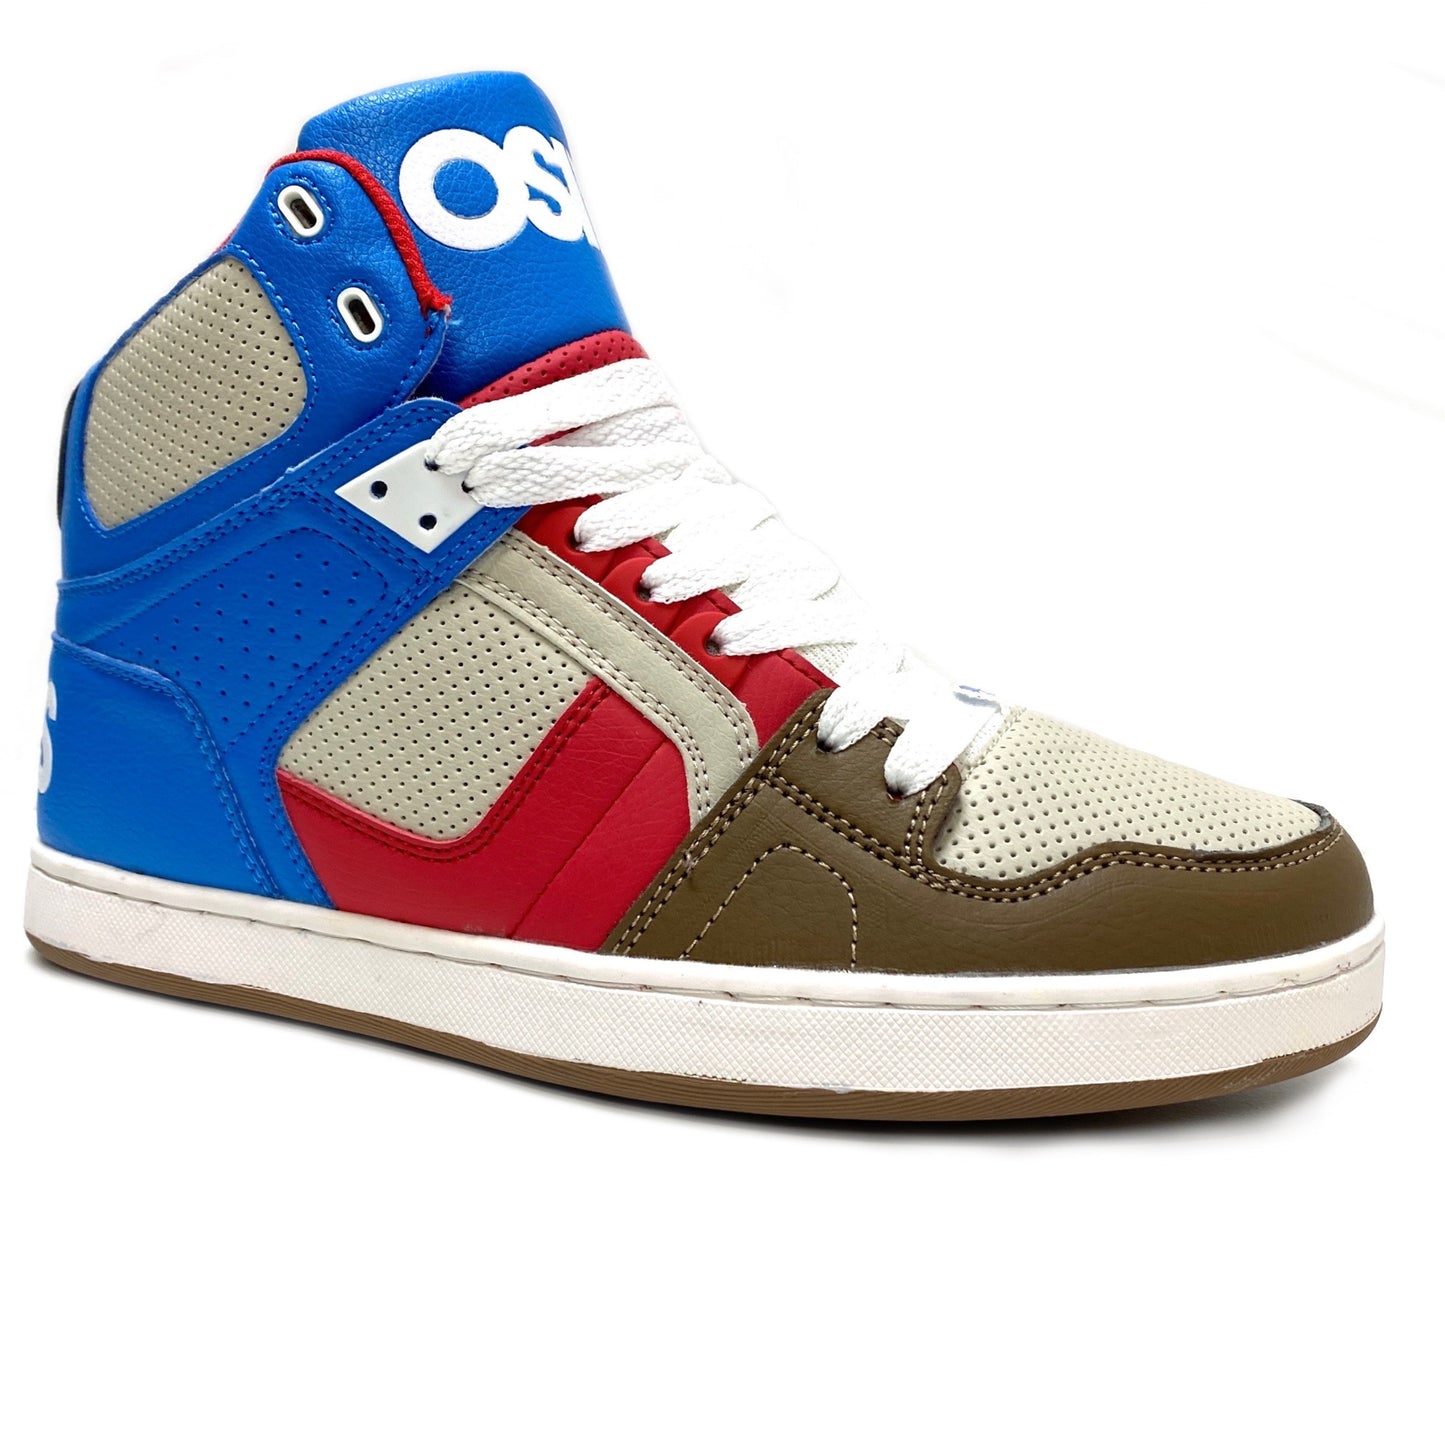 OSIRIS SHOES NYC 83 CLK BLUE CREAM & RED TRAINERS